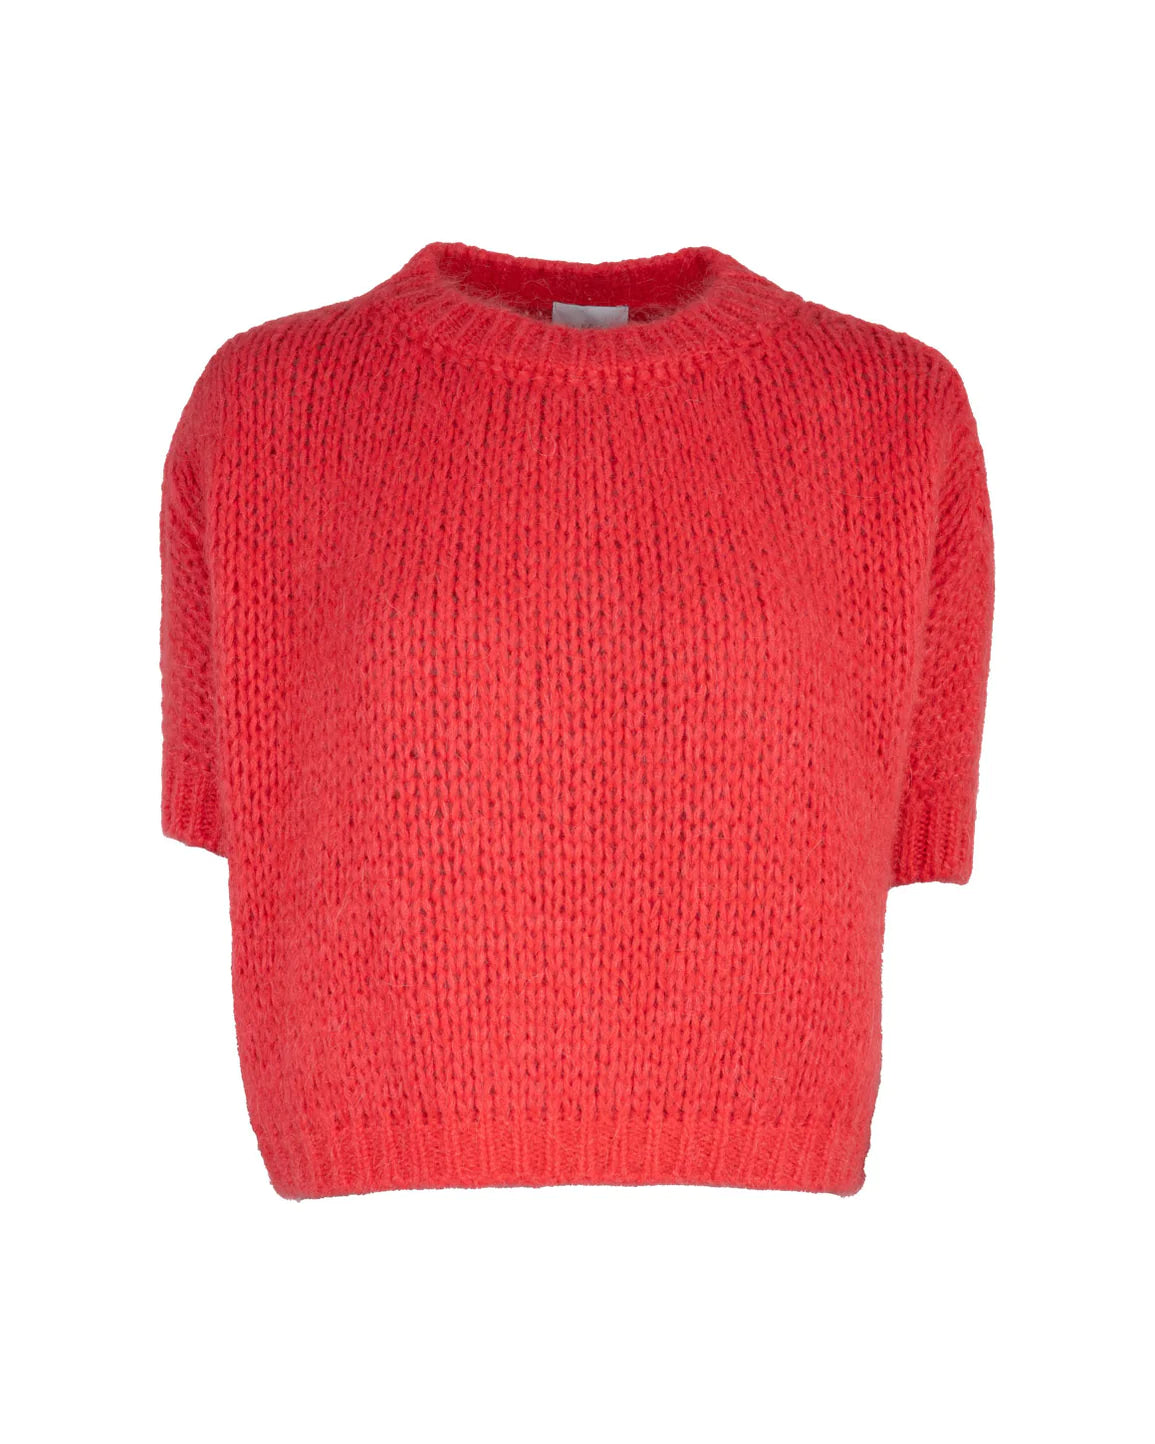 Sally Knit - Coral red